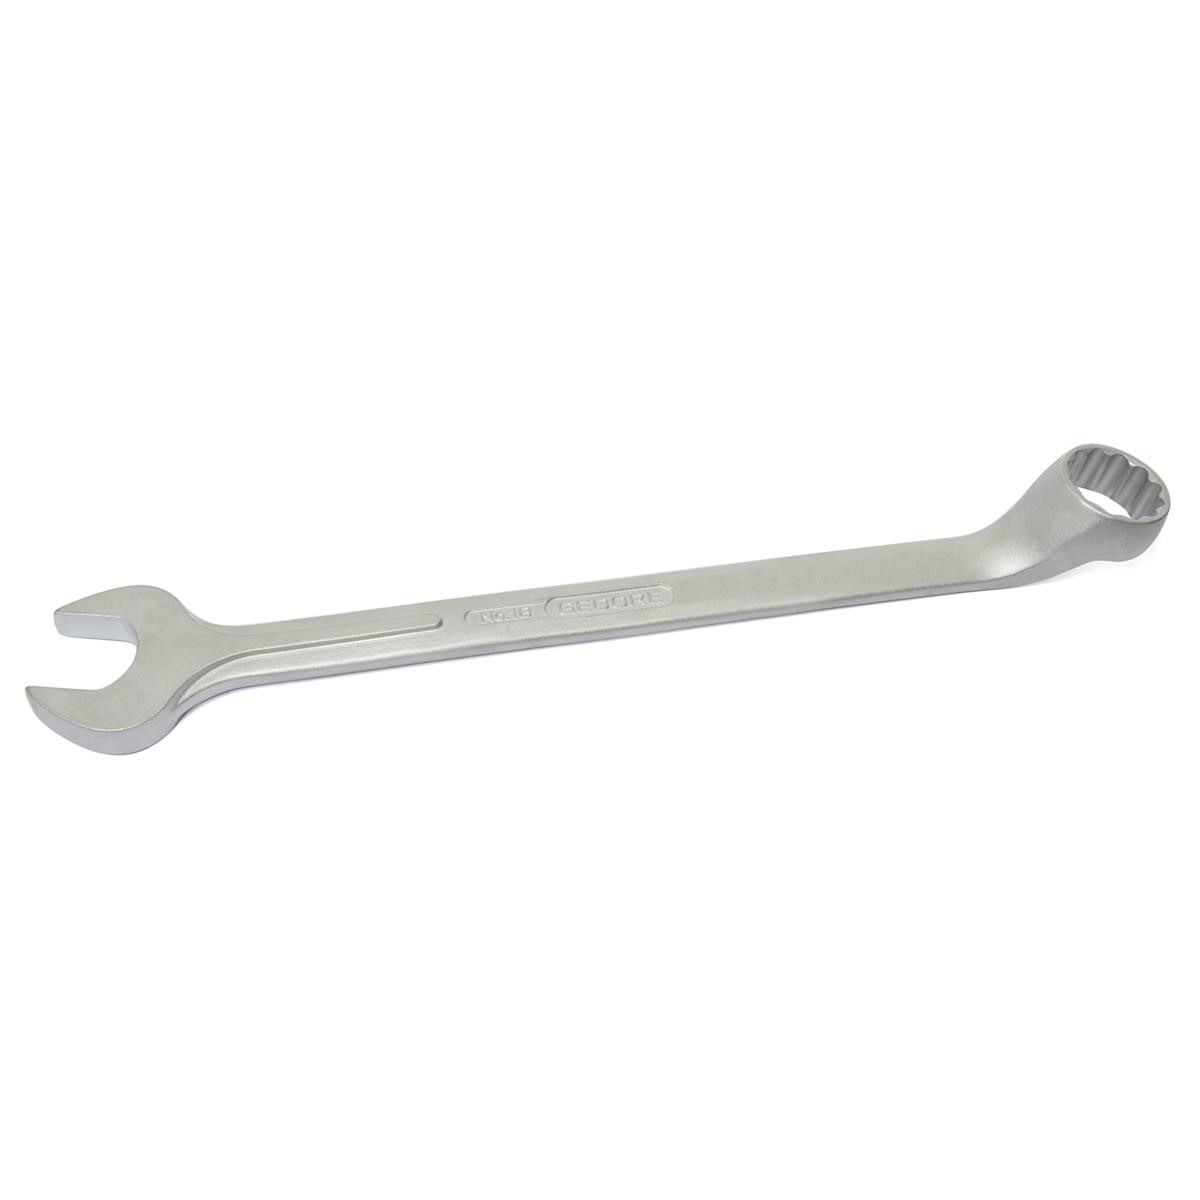 Zanbaline Combination Wrench  32 mm, length 412 mm, cranked